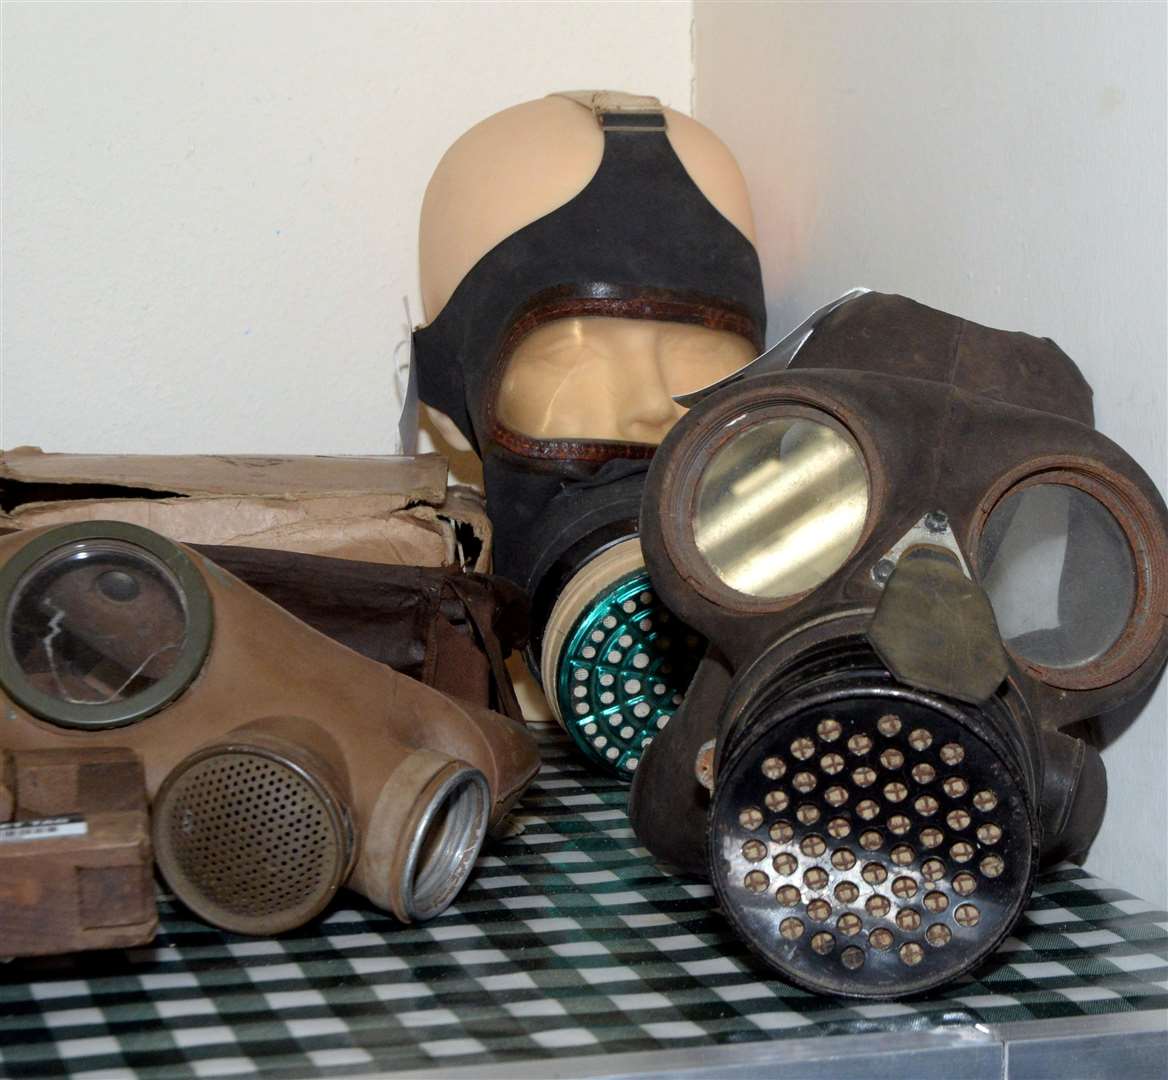 Gas masks in a reenactment of the operating room.